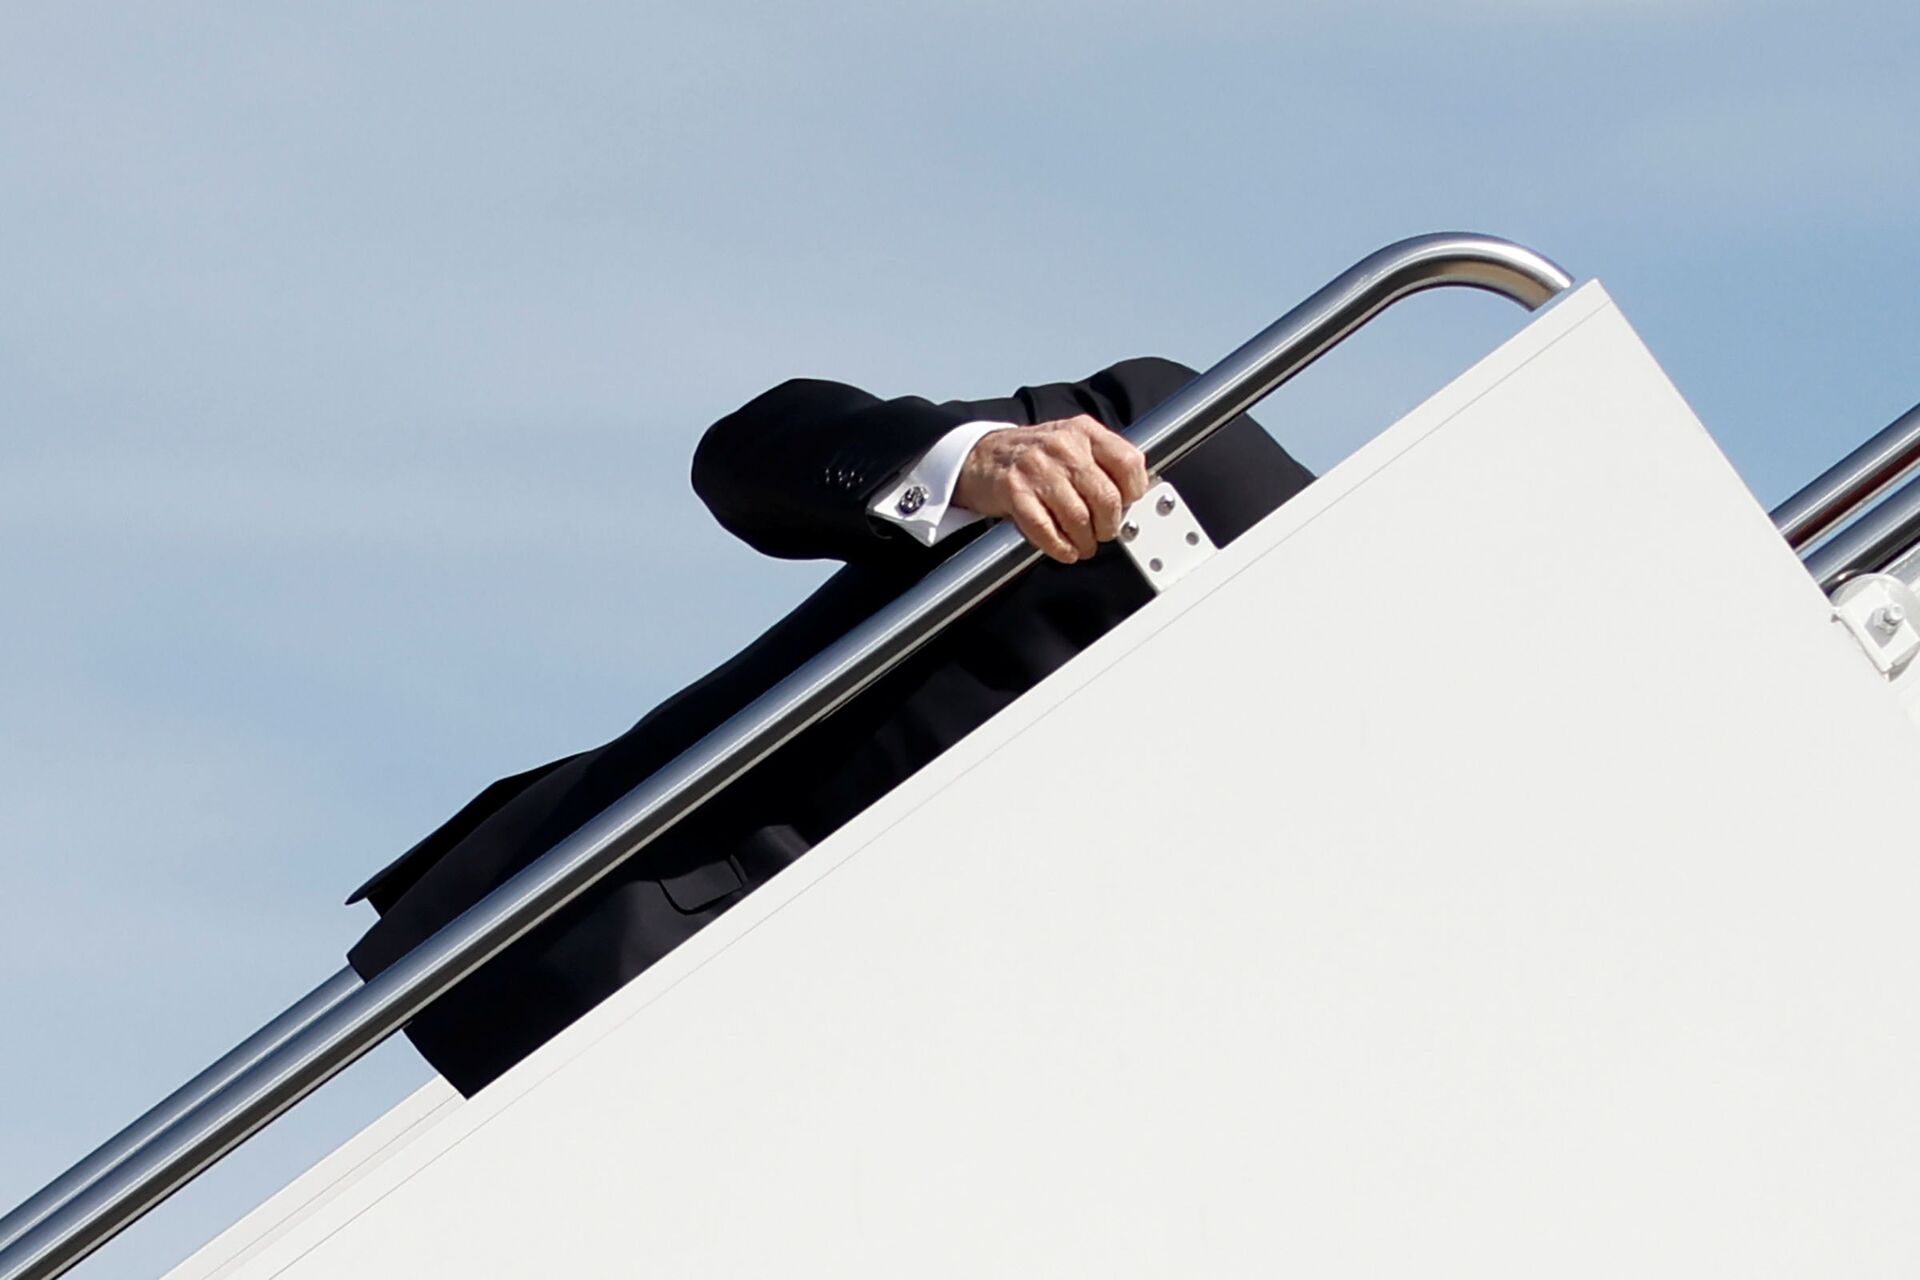 US President Joe Biden grabs onto the railing after he stumbled while boarding Air Force One as he departs Washington on travel to Atlanta, Georgia to promote the $1.9 trillion coronavirus disease (COVID-19) aid package known as the American Rescue Plan, at Joint Base Andrews, Maryland, US, March 19, 2021 - Sputnik International, 1920, 07.09.2021